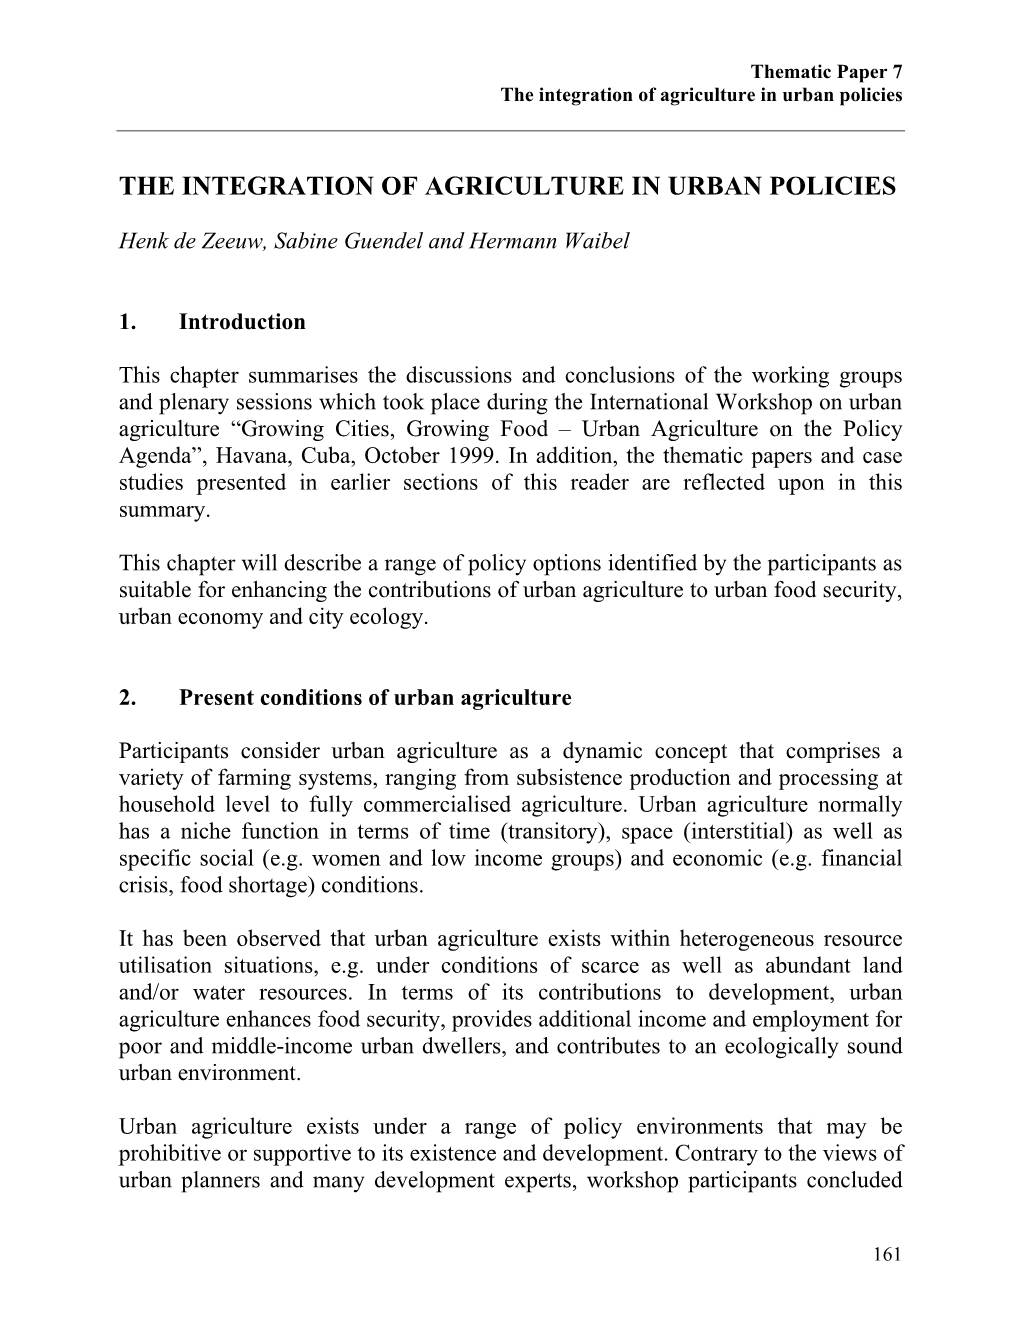 The Integration of Agriculture in Urban Policies